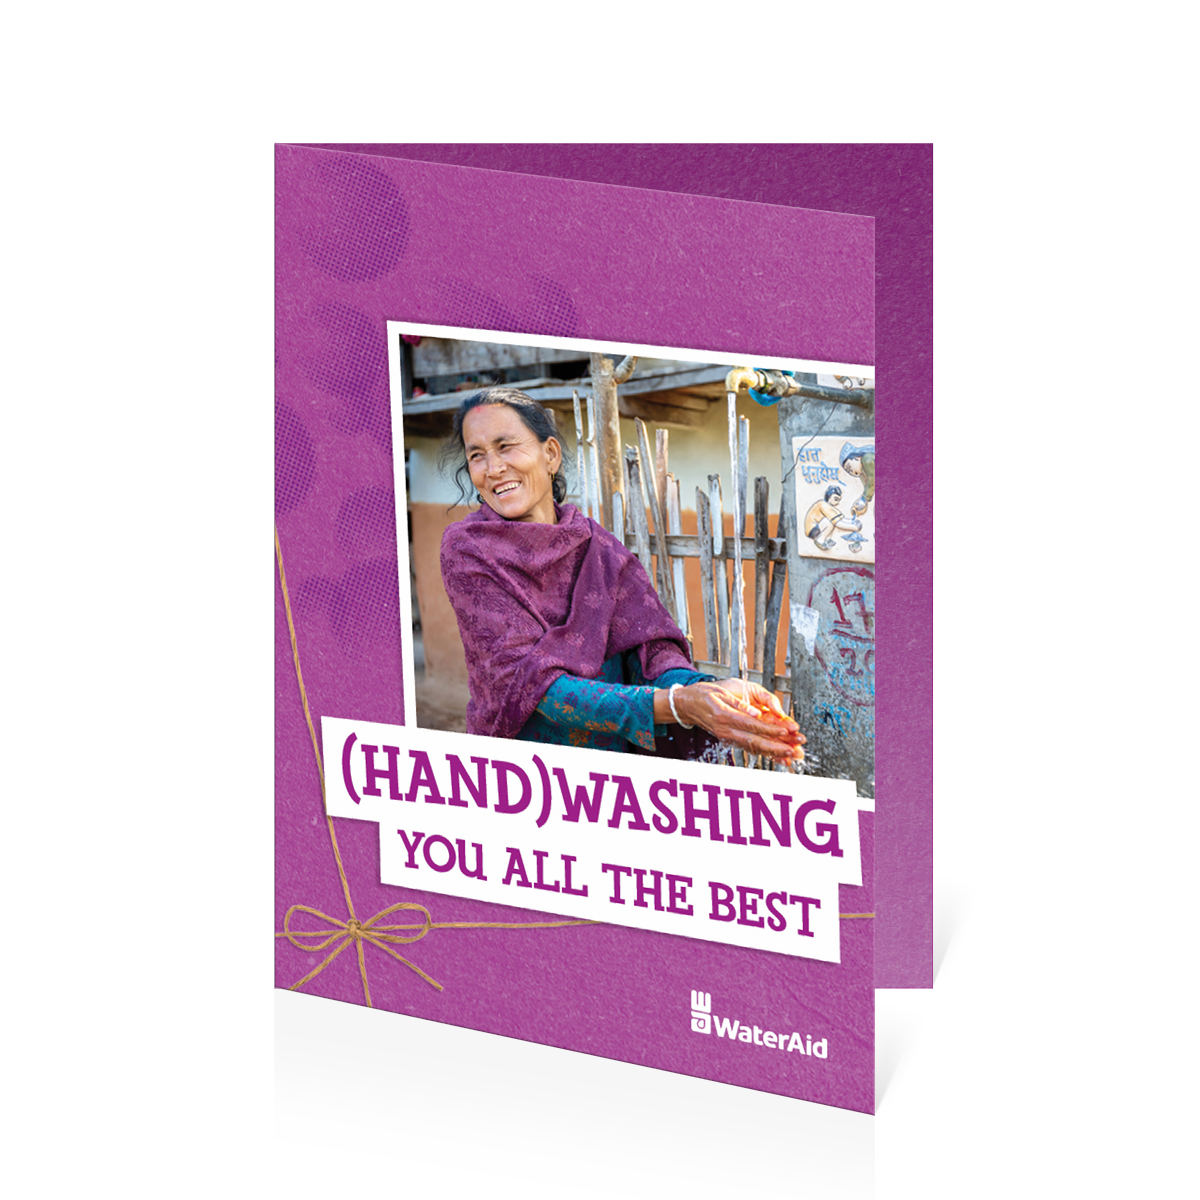 You can help build a simple handwashing station